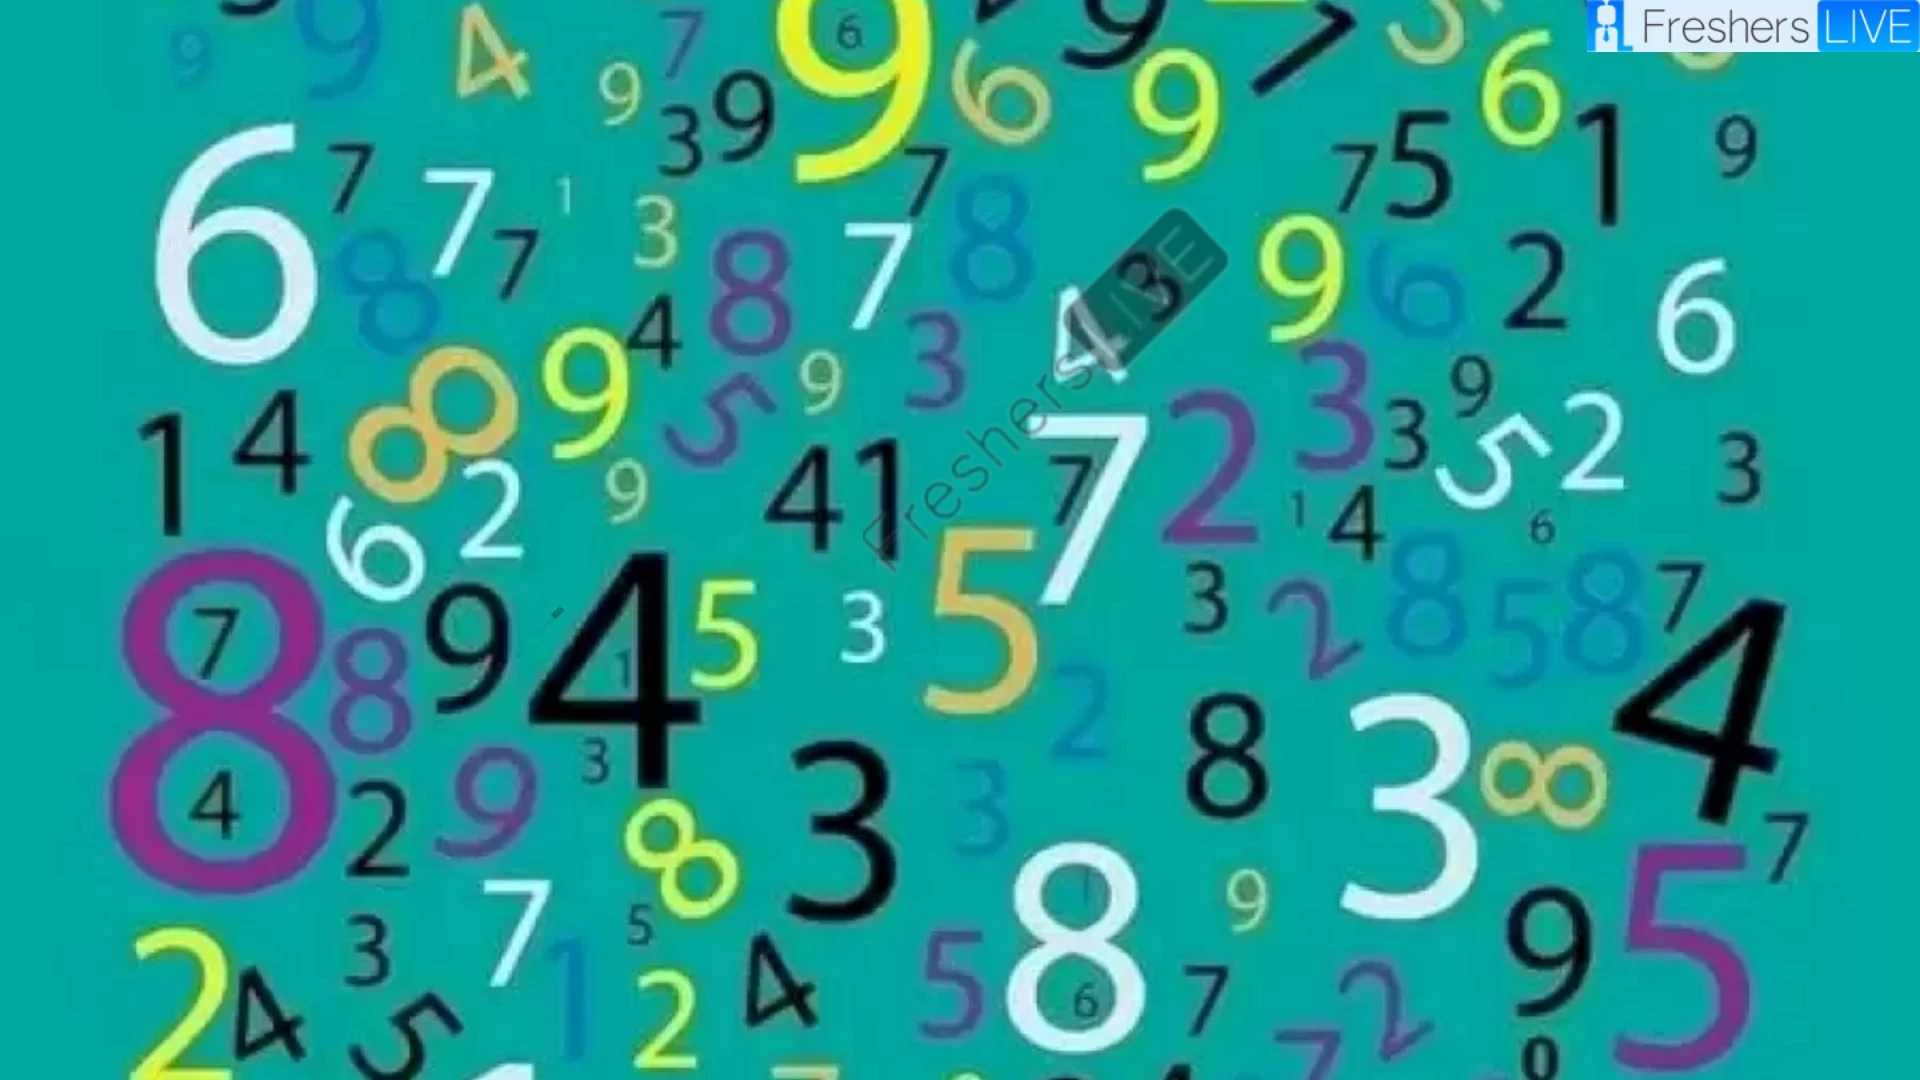 Only Math Lovers Can Spot The Hidden Zero Between These Various Numbers In Less Than 5 Seconds